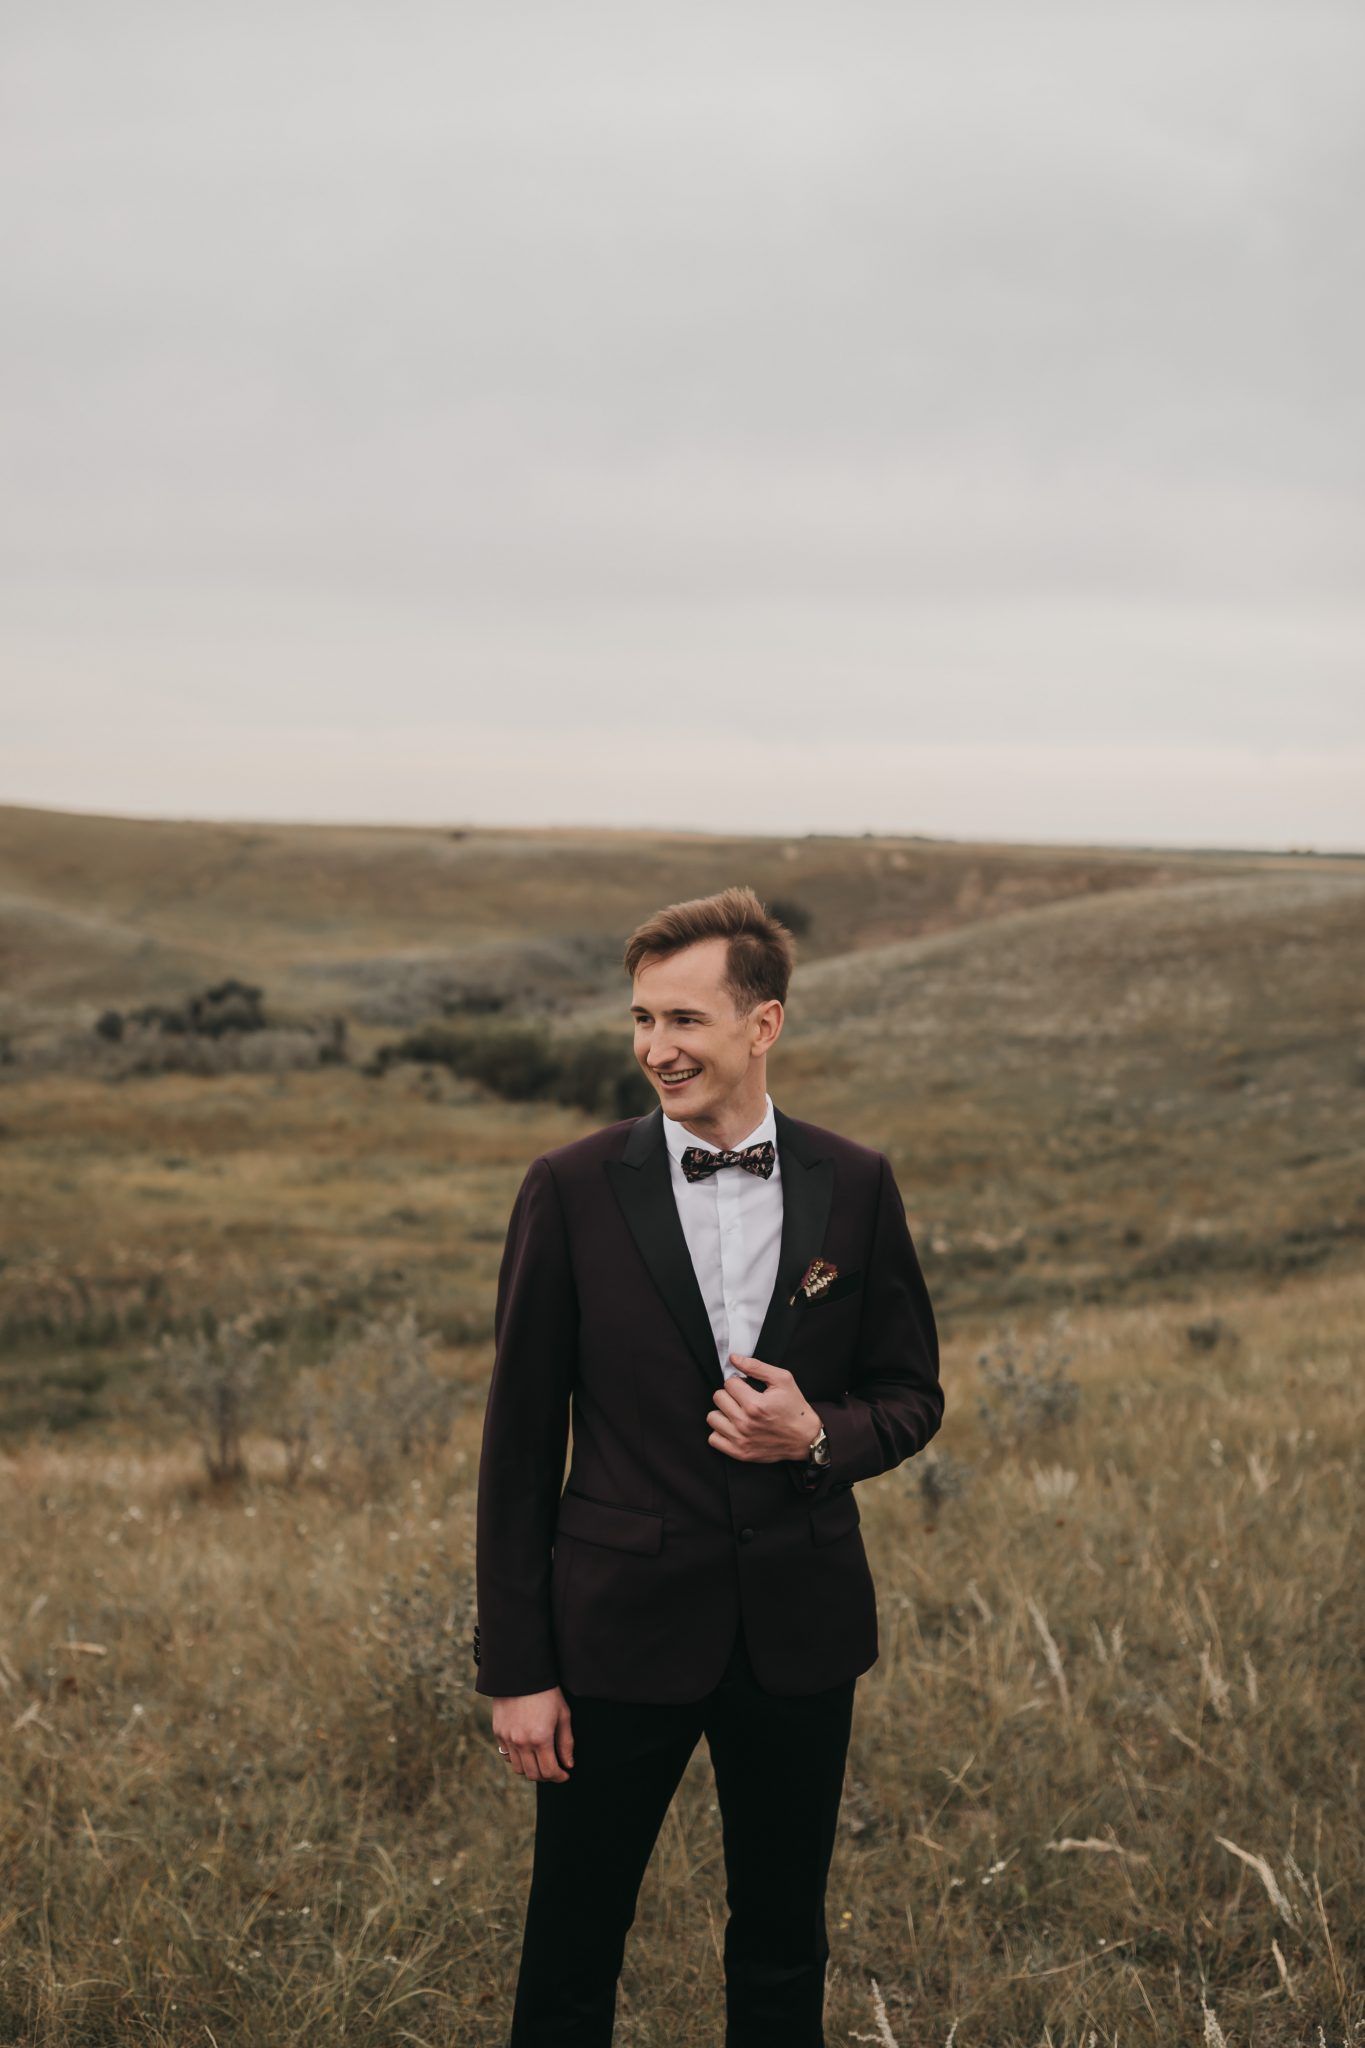 Looking Dapper: 10 Looks for the Modern Groom - on the Bronte Bride Blog, groom style, Calgary Wedding Inspiration Blog, stud, dream boat, perfect husband, purple suit